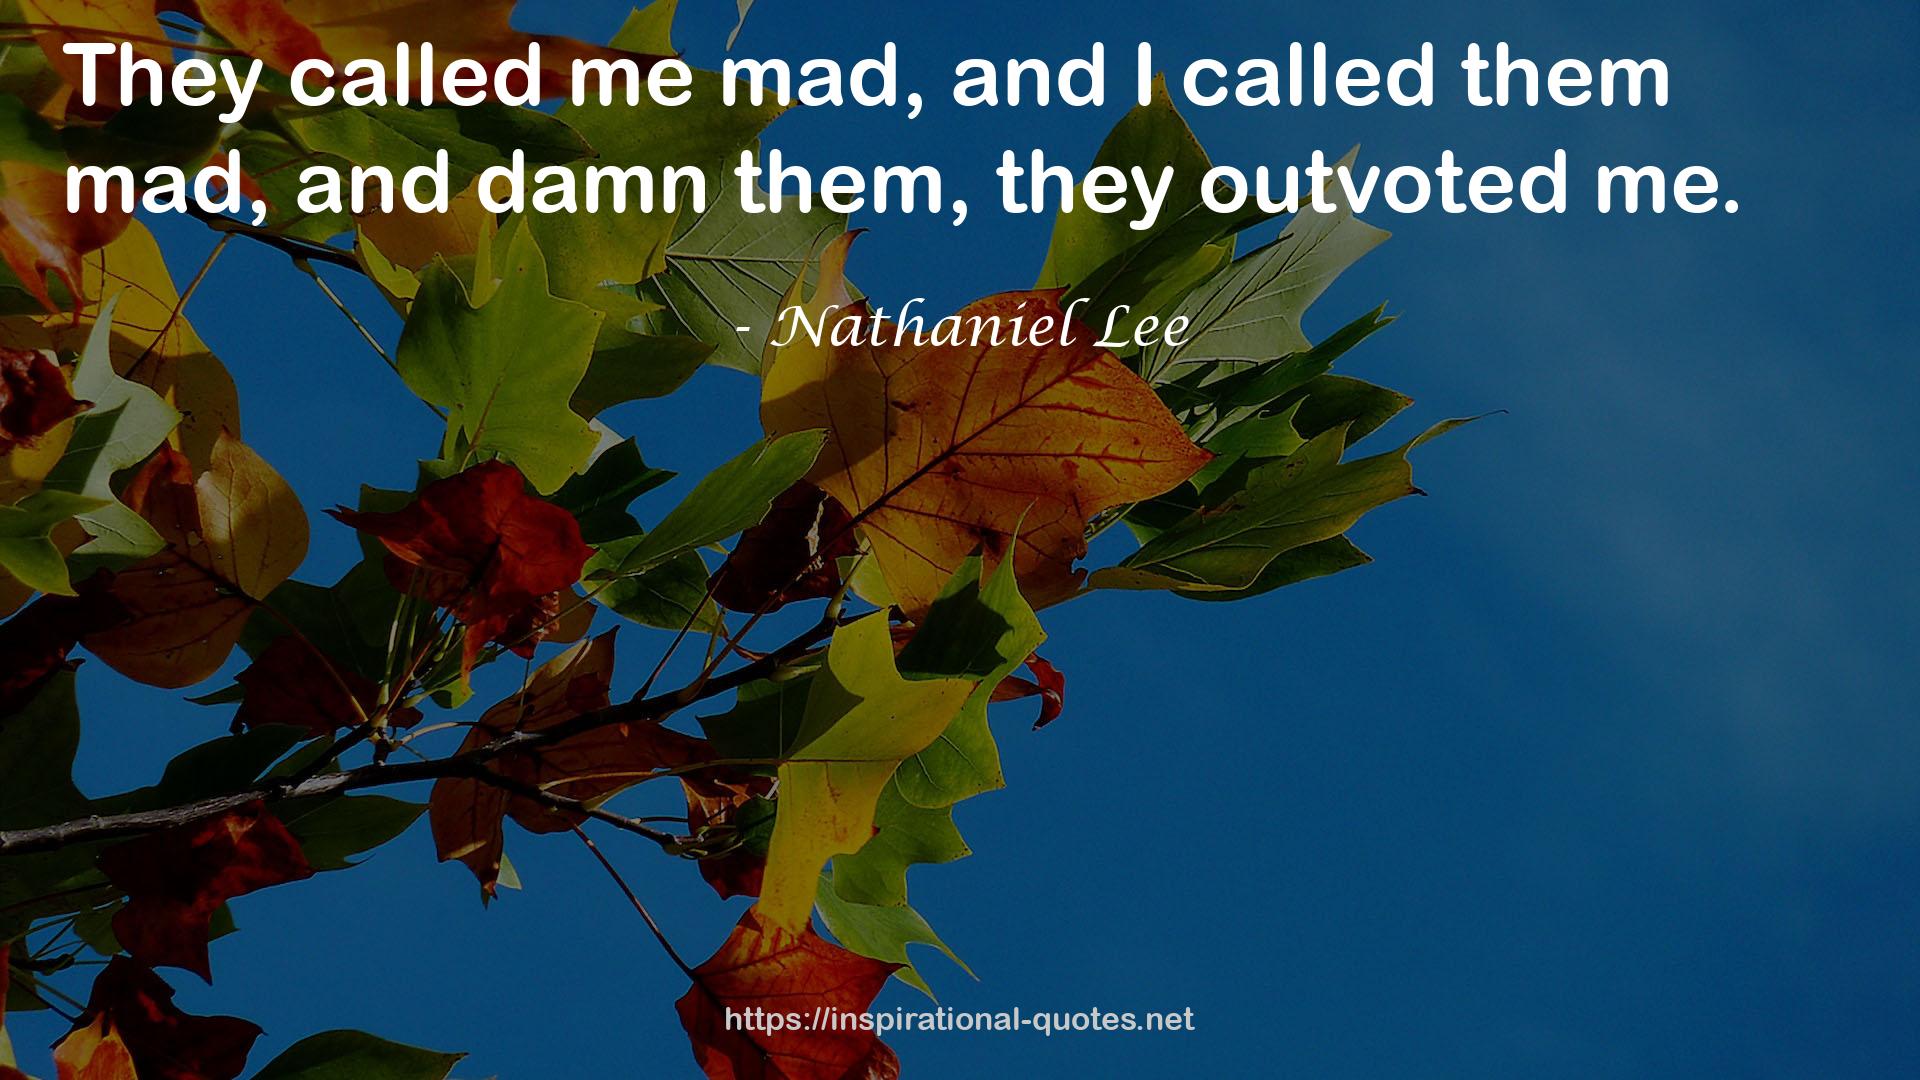 Nathaniel Lee QUOTES